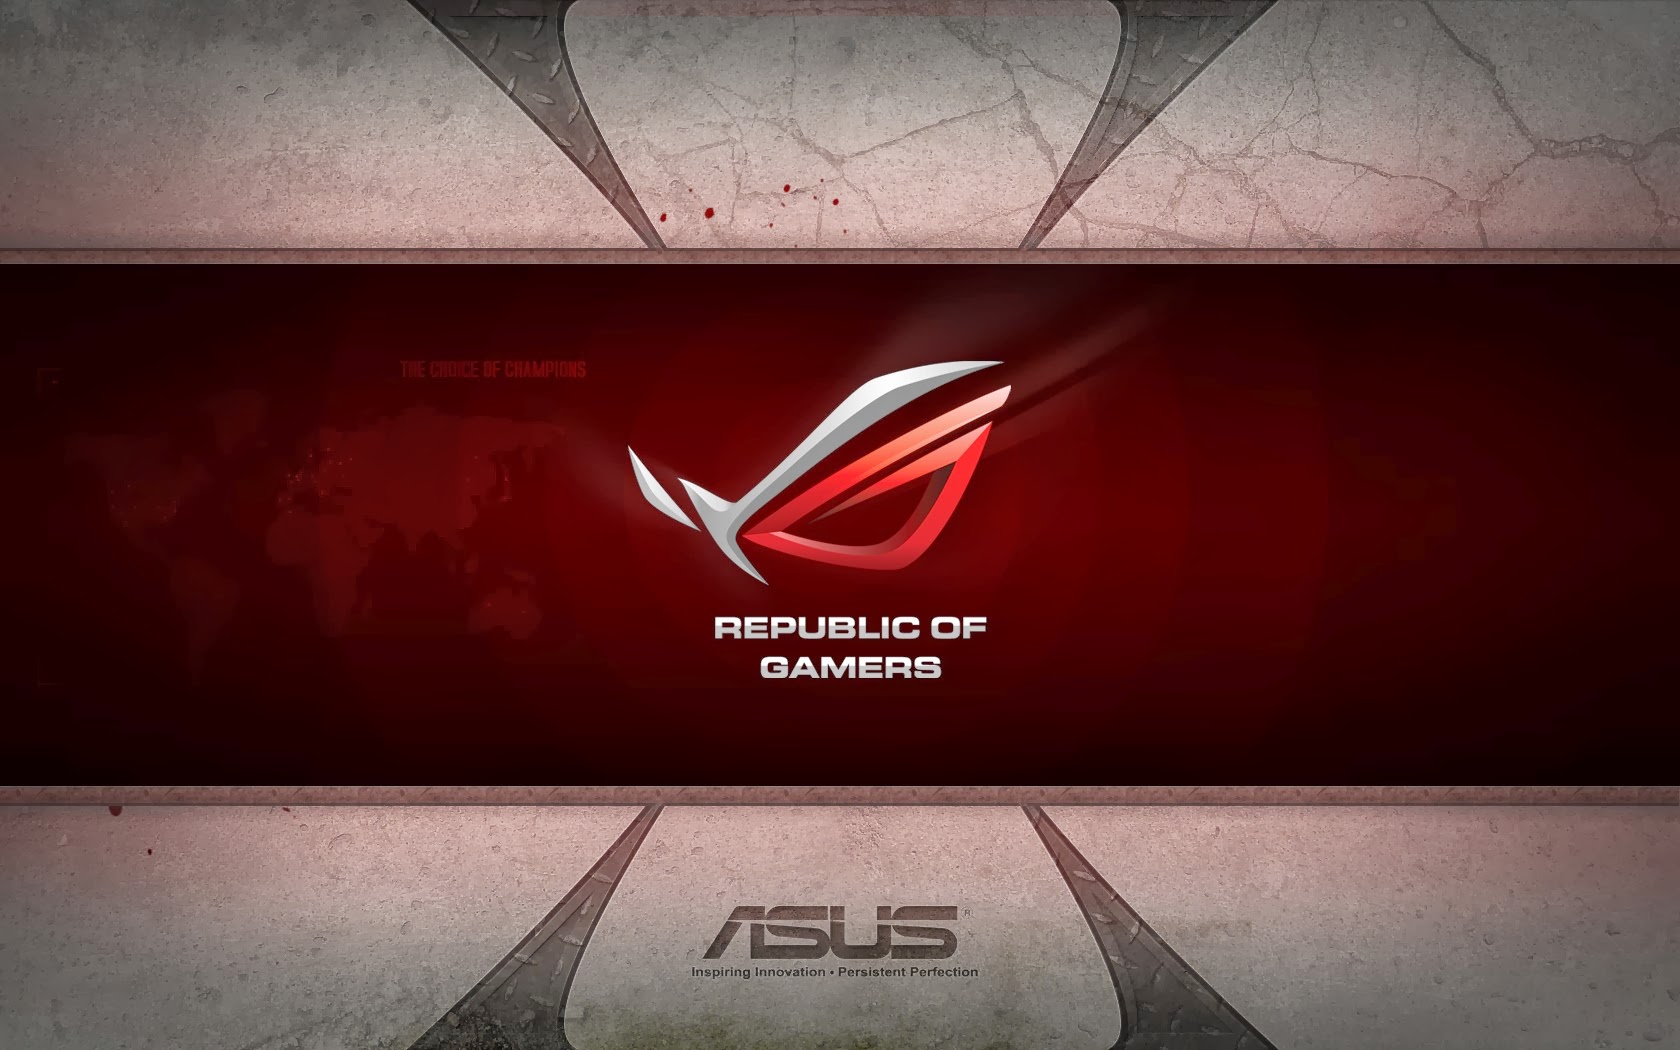 Asus Republic Of Game Logo Hd Wallpaper | High Definitions Wallpapers